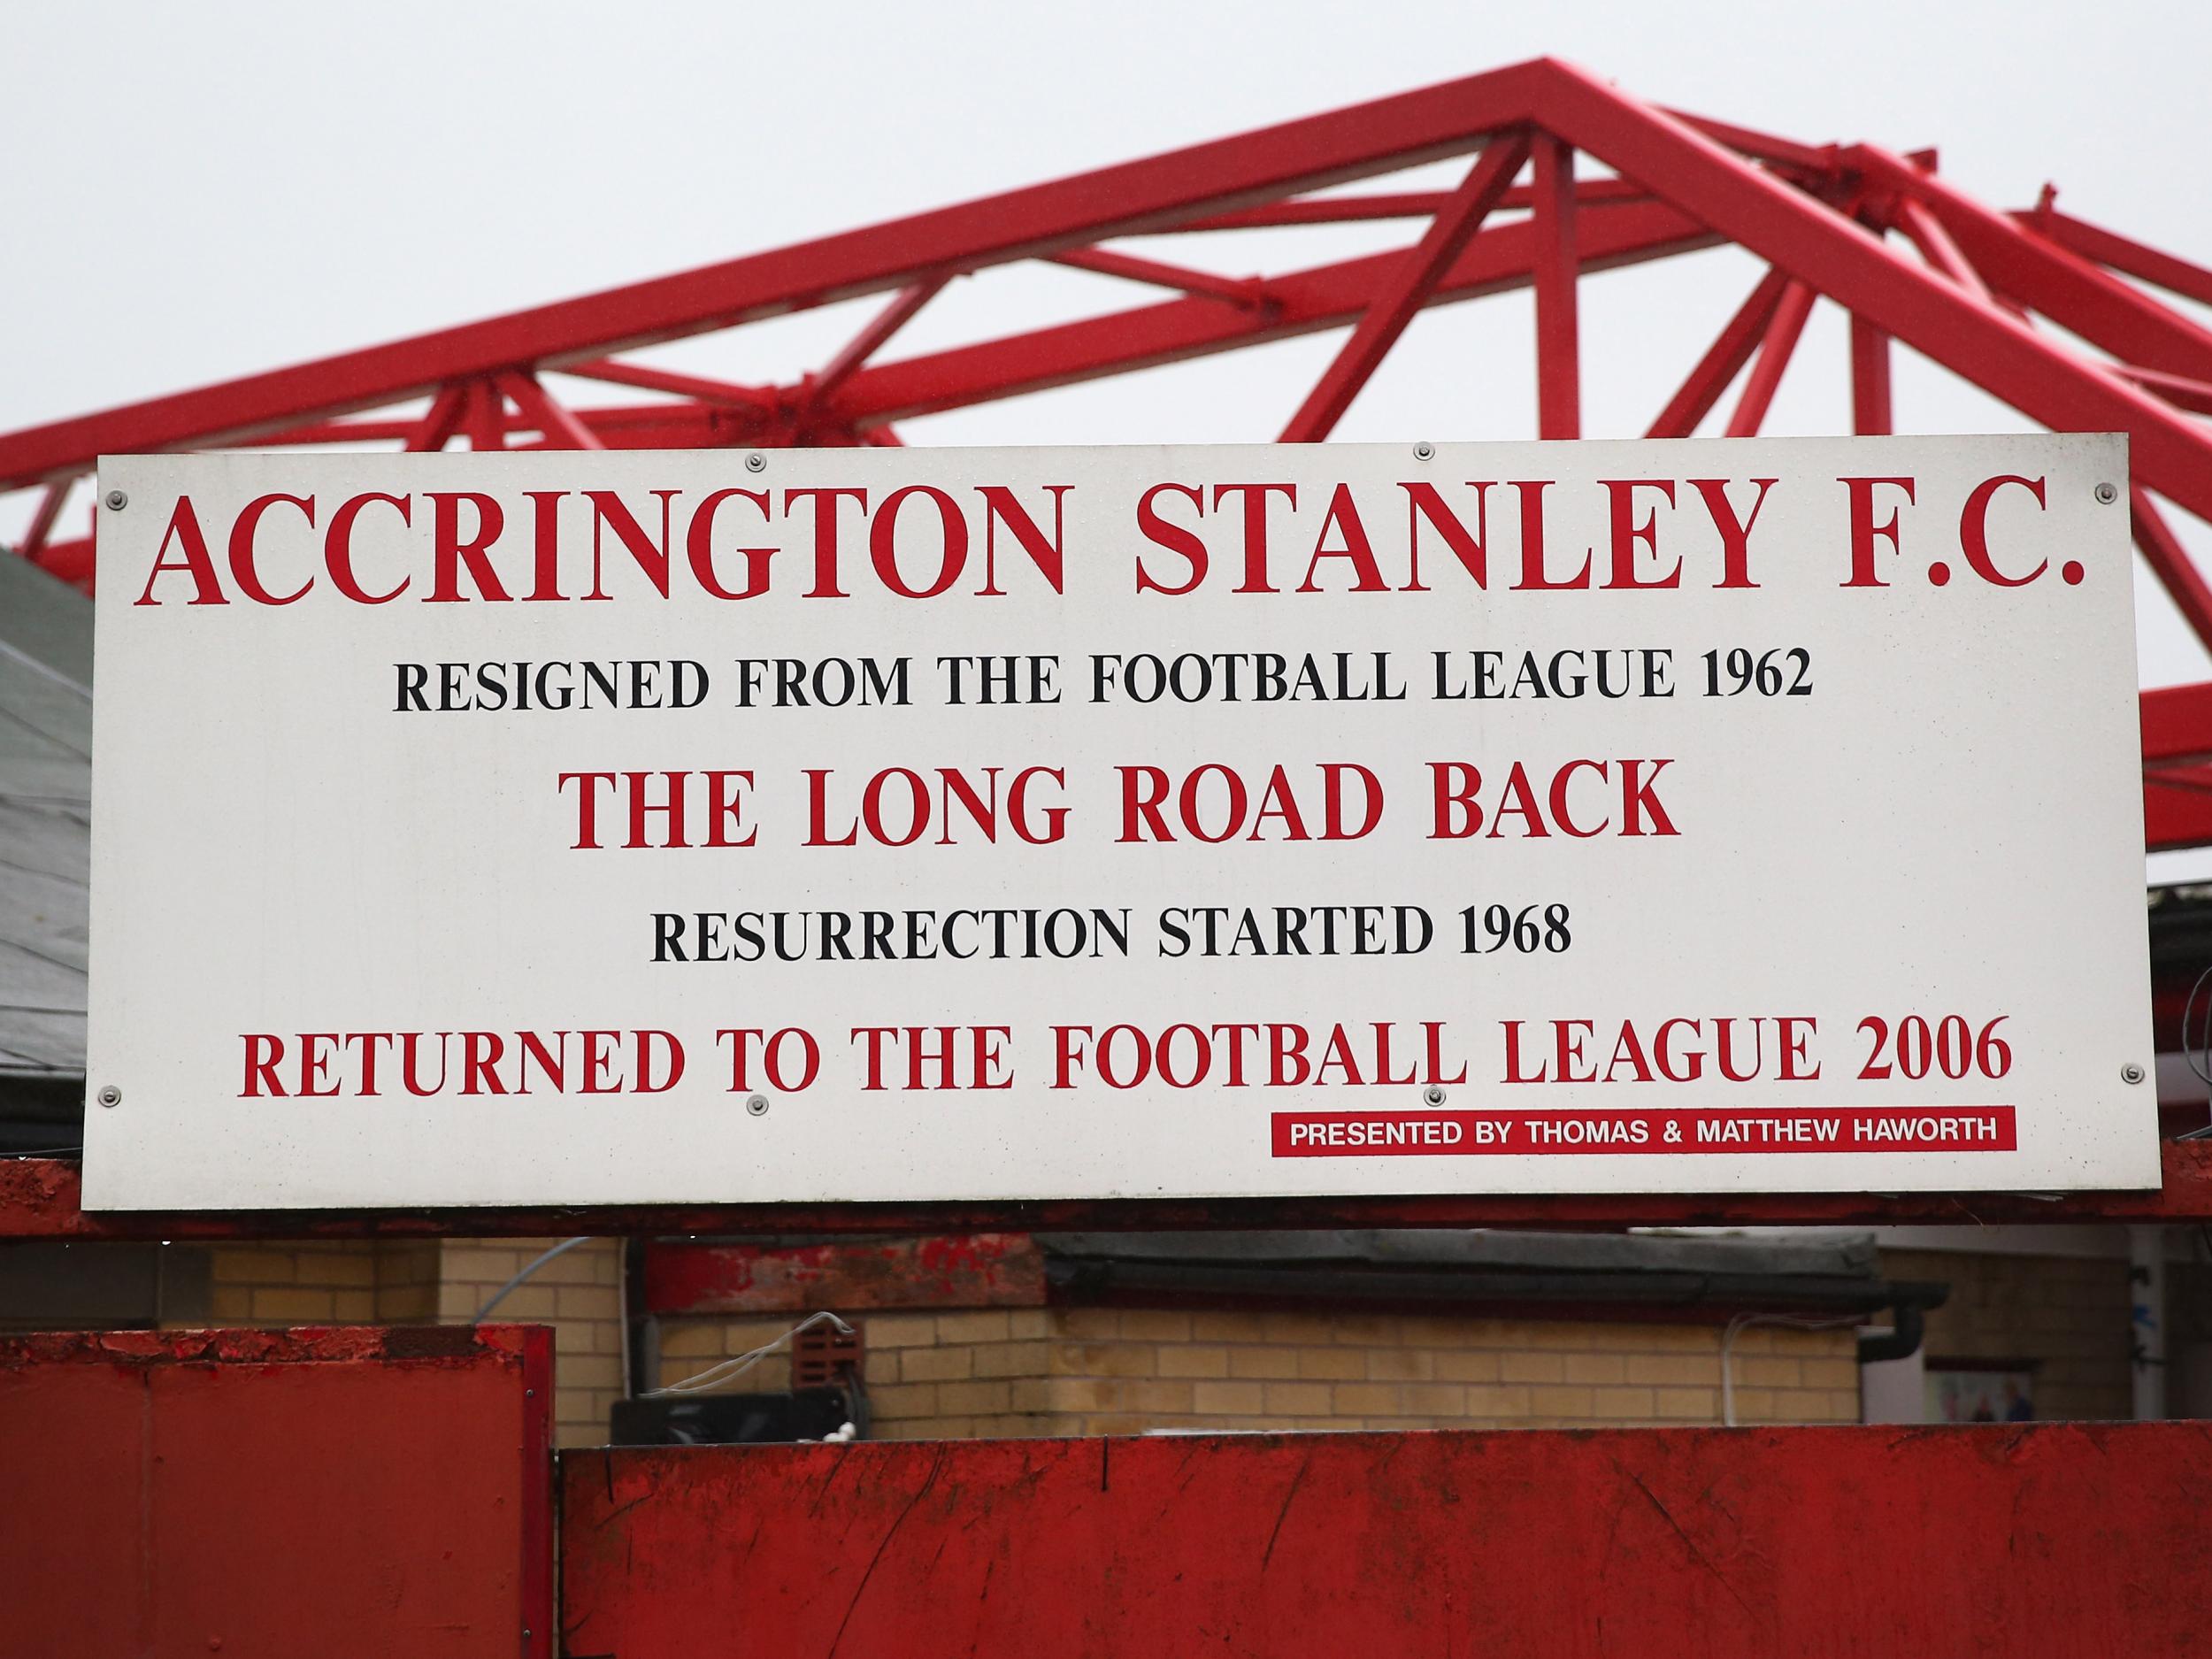 Accrington Stanley sacked the player in May, a month before the festival